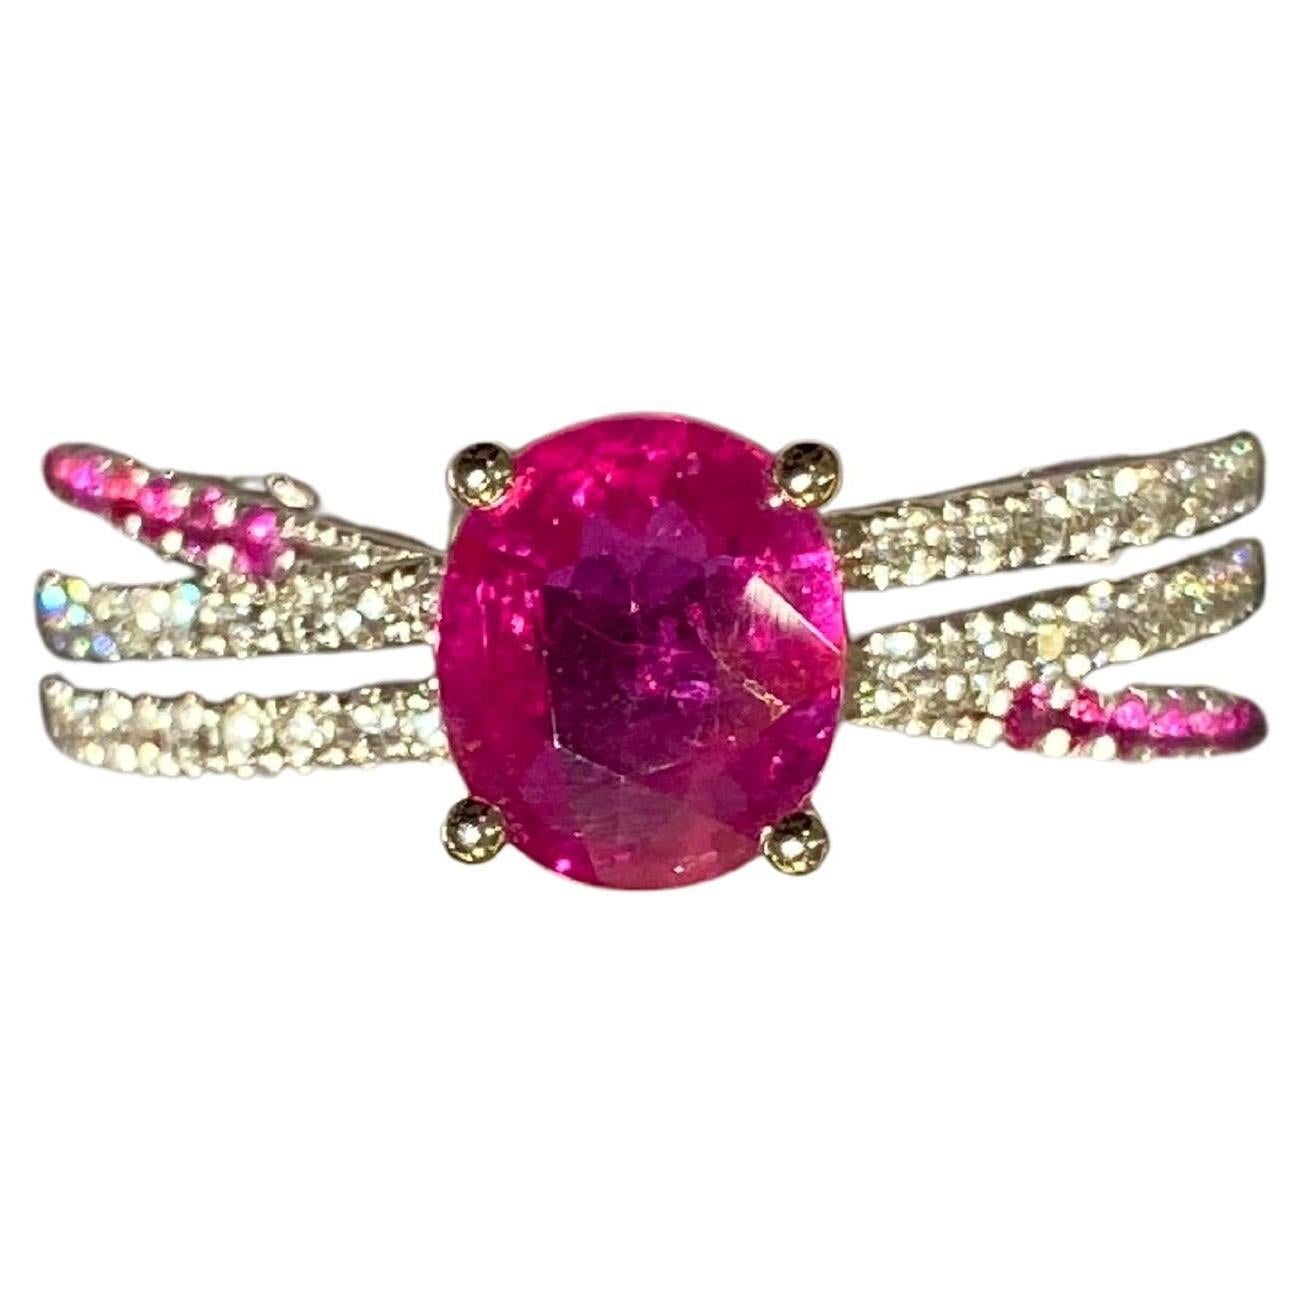 Eostre Purplish Pink Sapphire and Diamond Ring in 18k White Gold For Sale